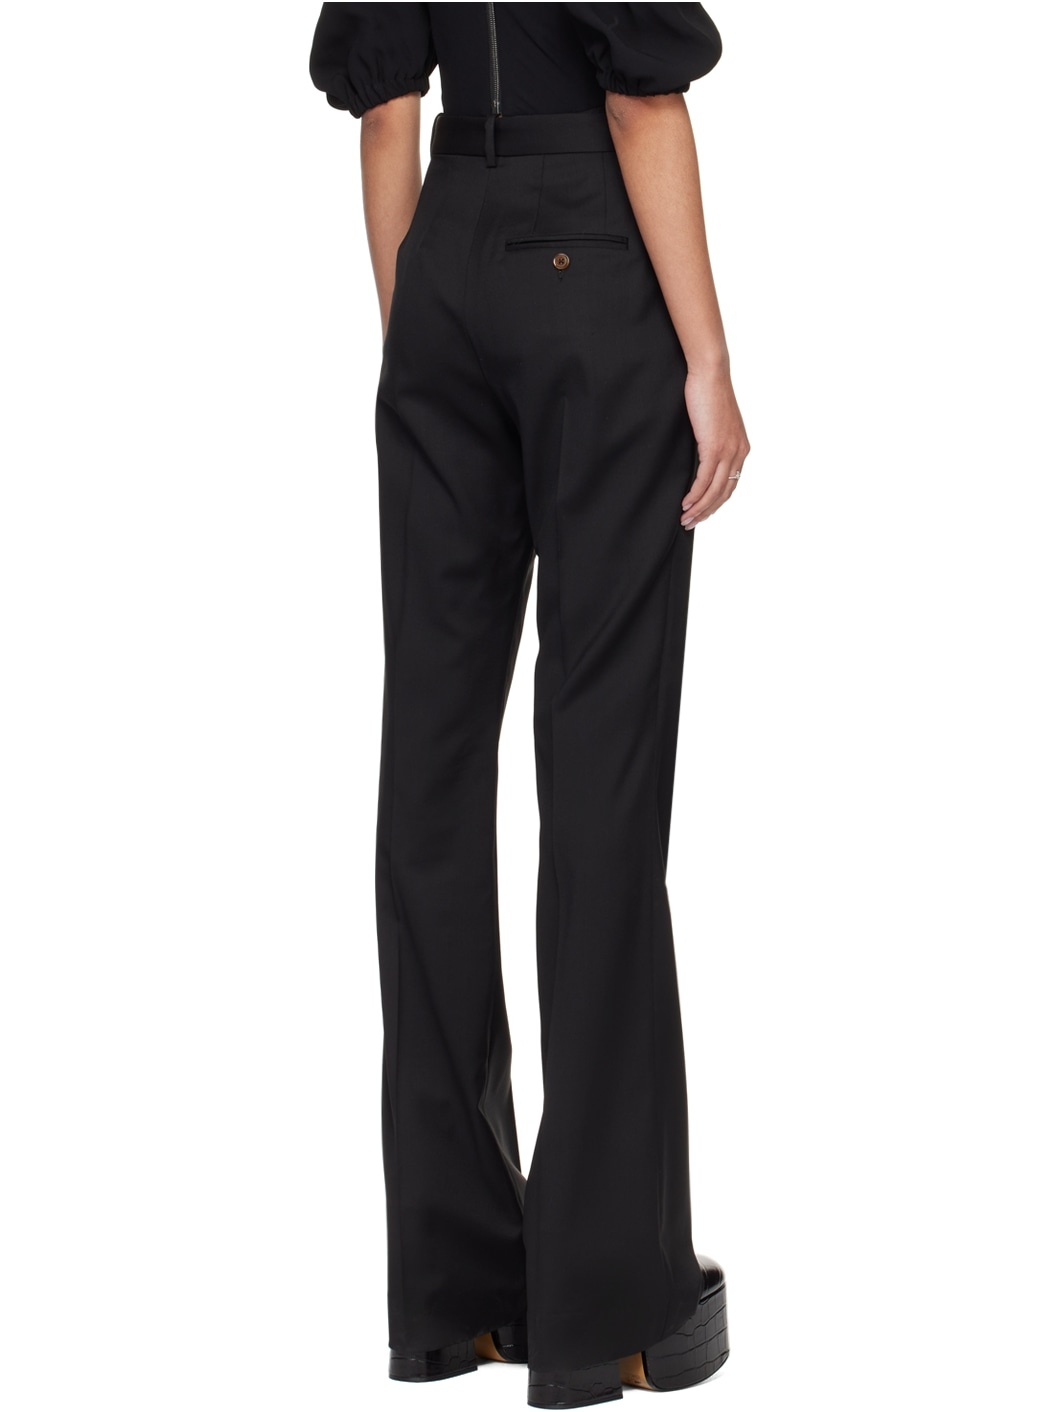 Black Ray Trousers - 3